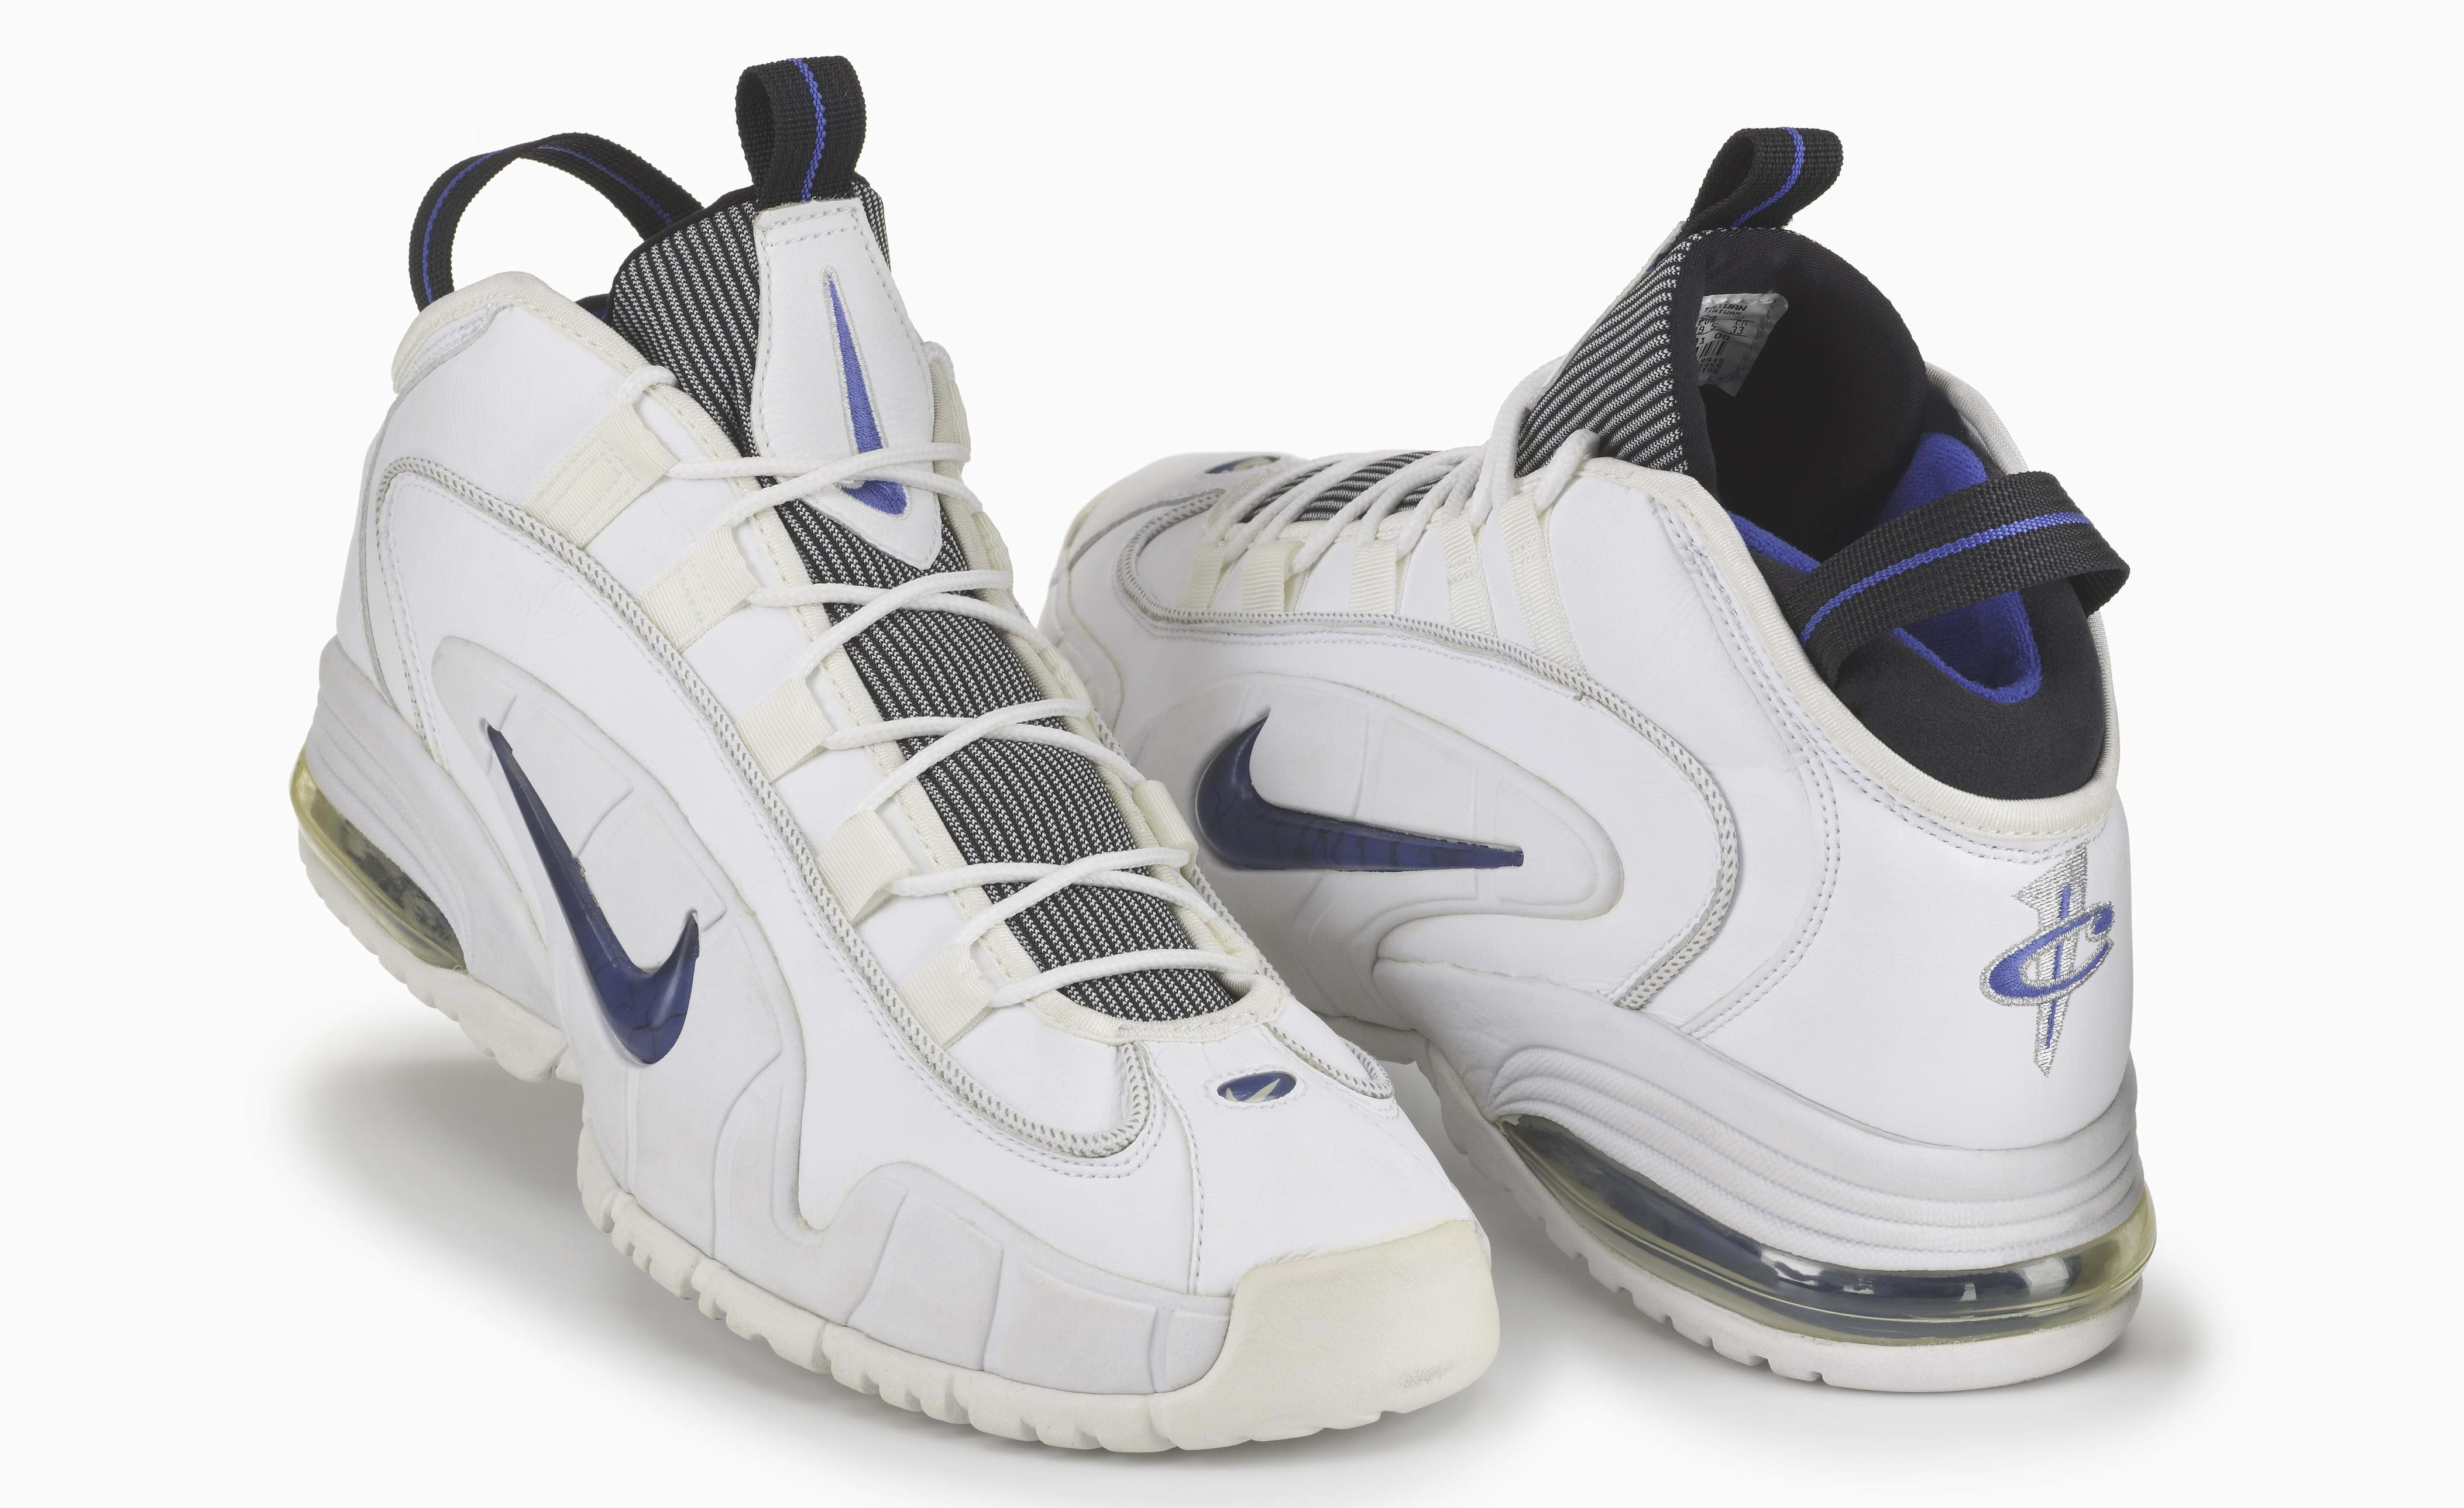 "Home" Nike Air Max Penny 1